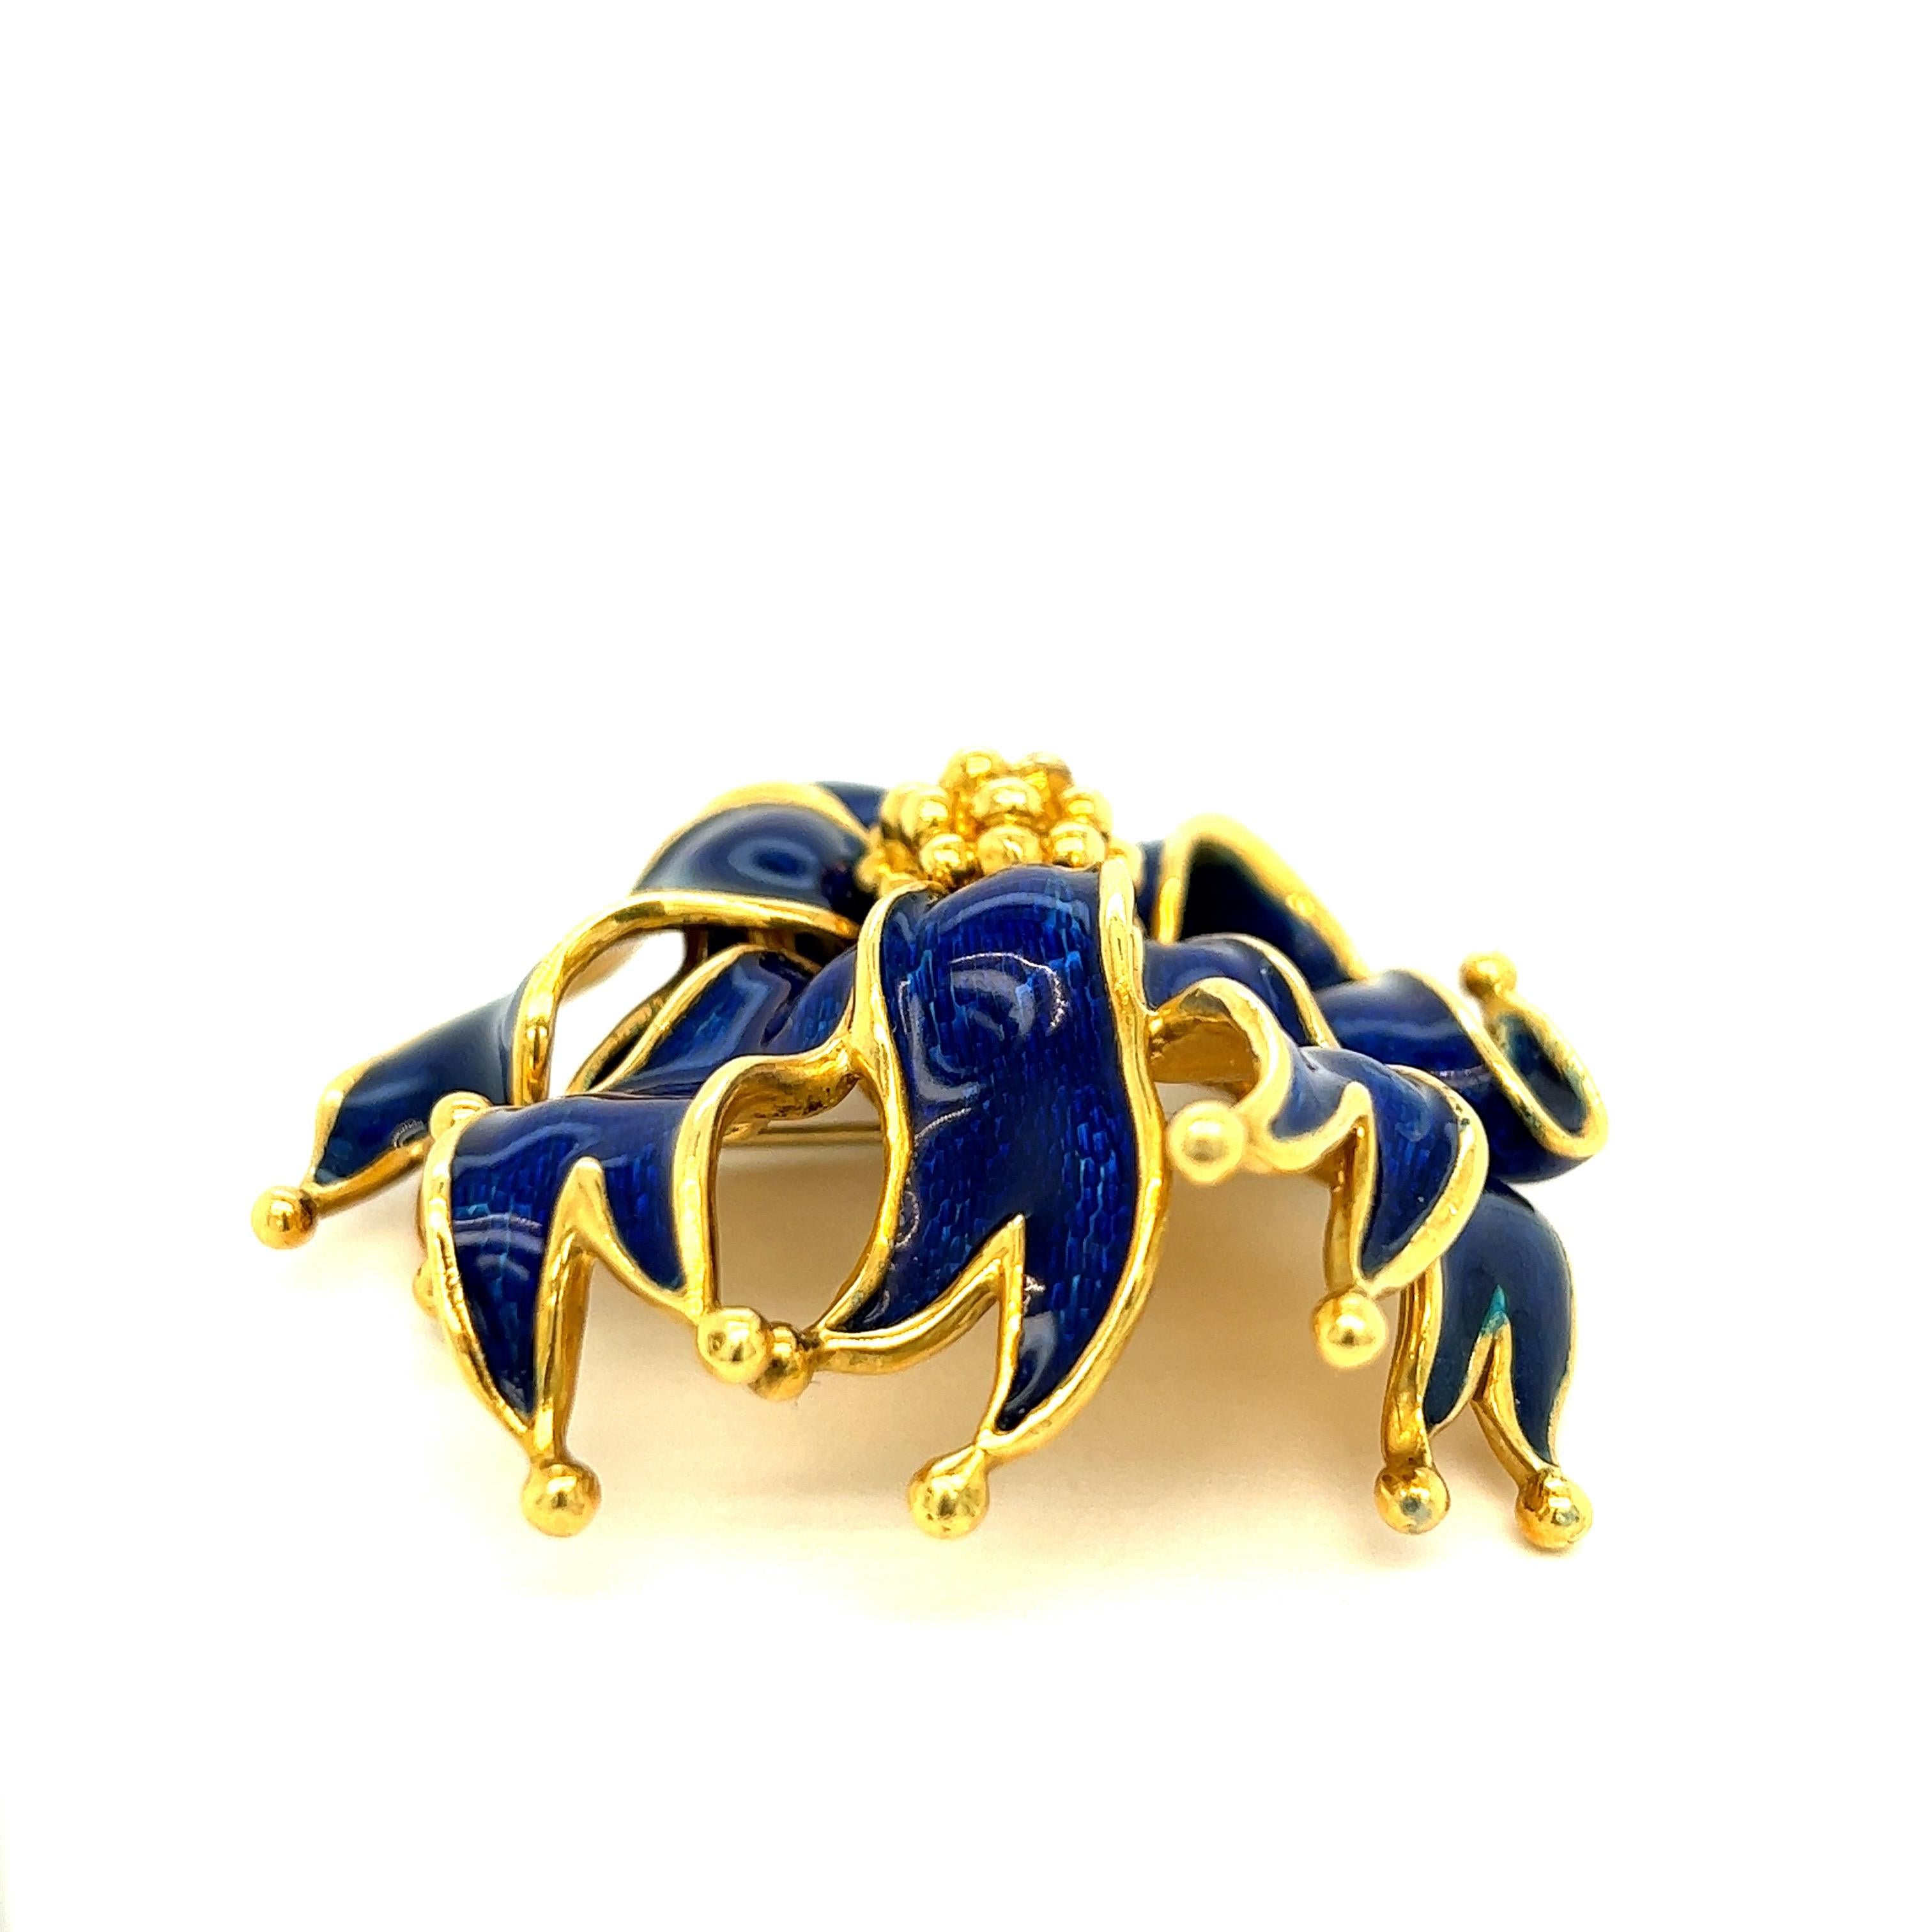 Tiffany & Co Royal Blue Enamel Ribbon Gold Brooch In Excellent Condition For Sale In New York, NY